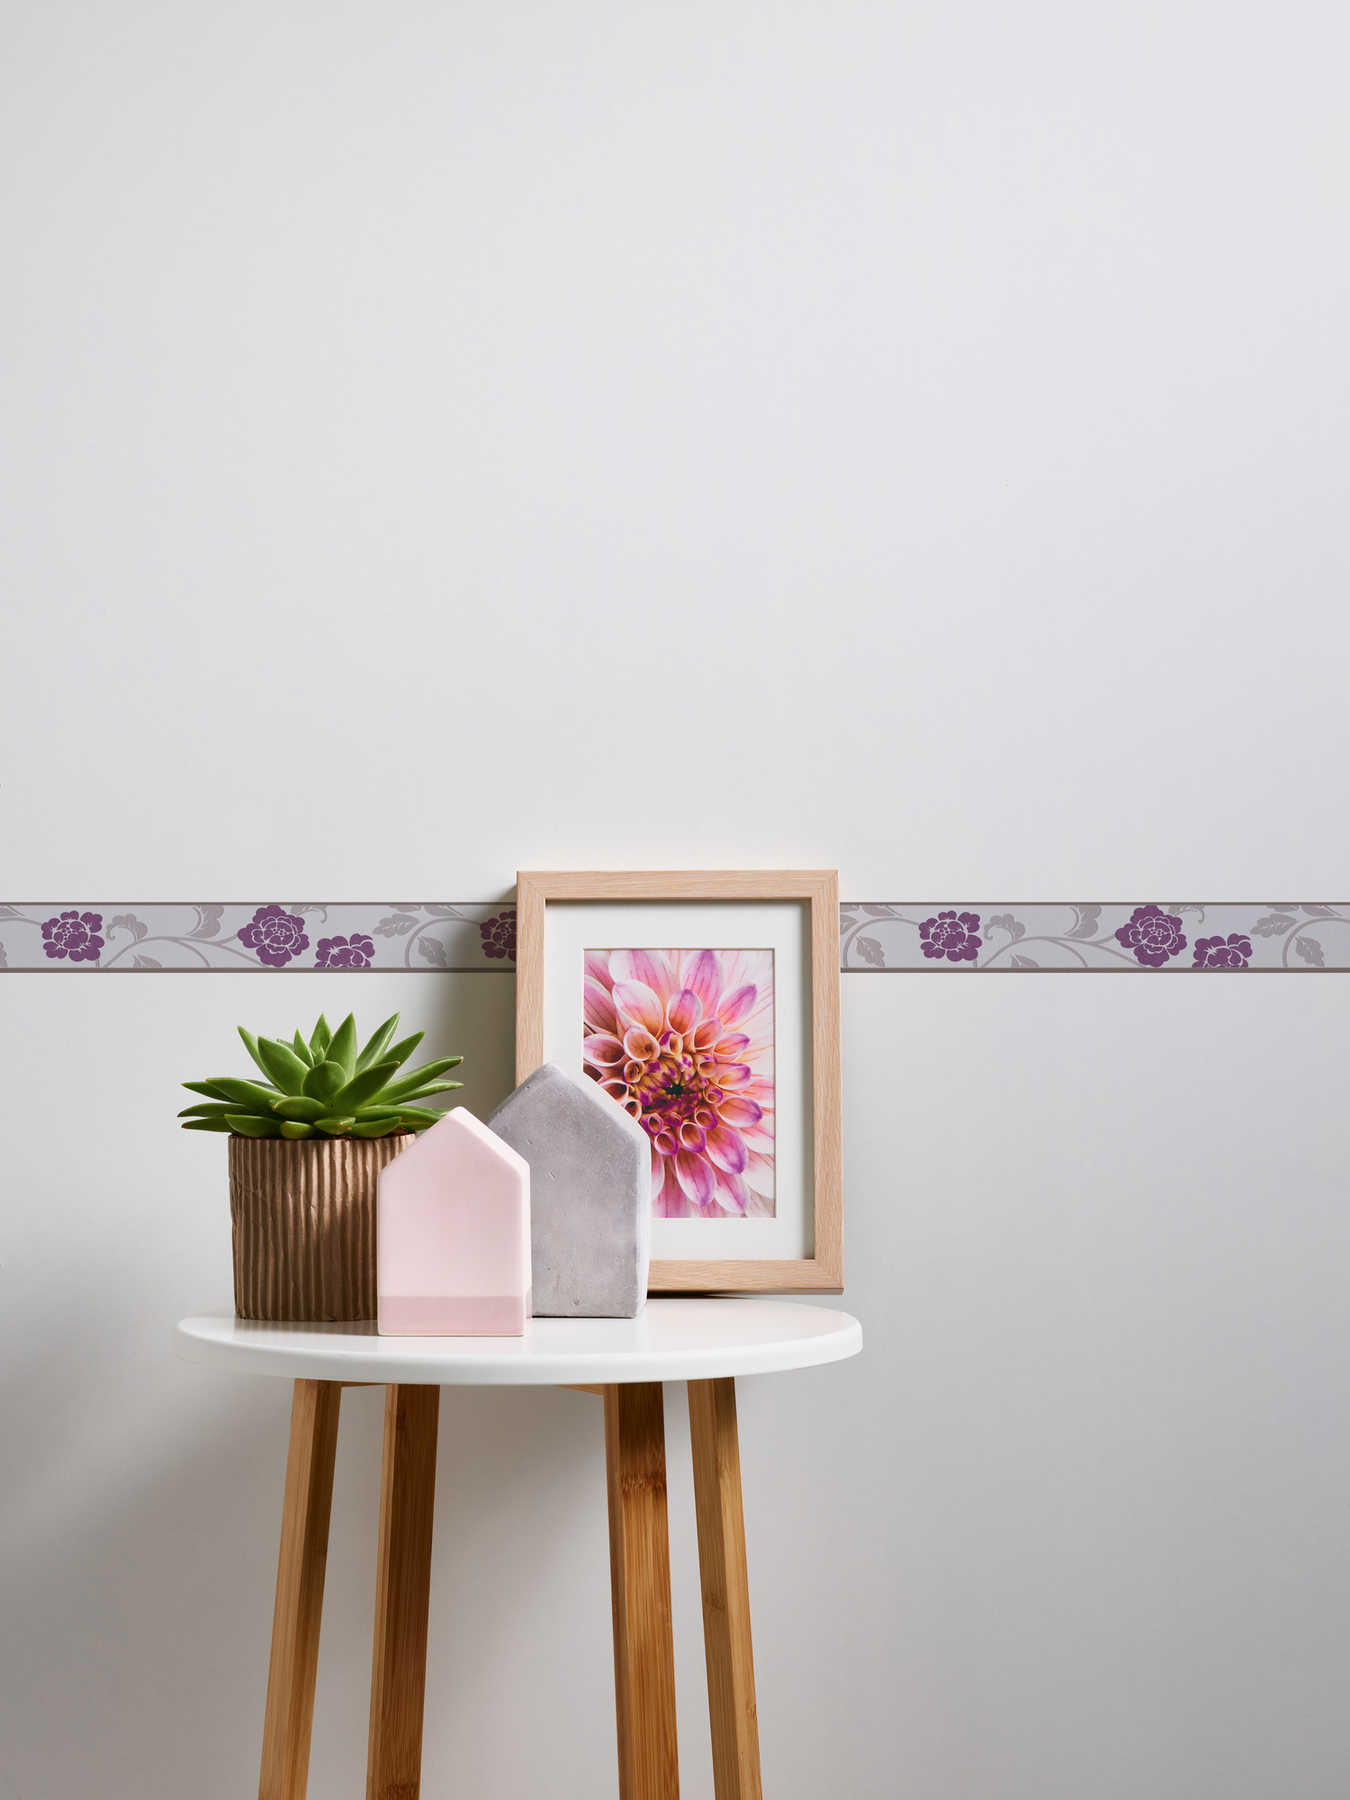             Border with flowers and leaves tendrils with texture pattern - purple, grey
        